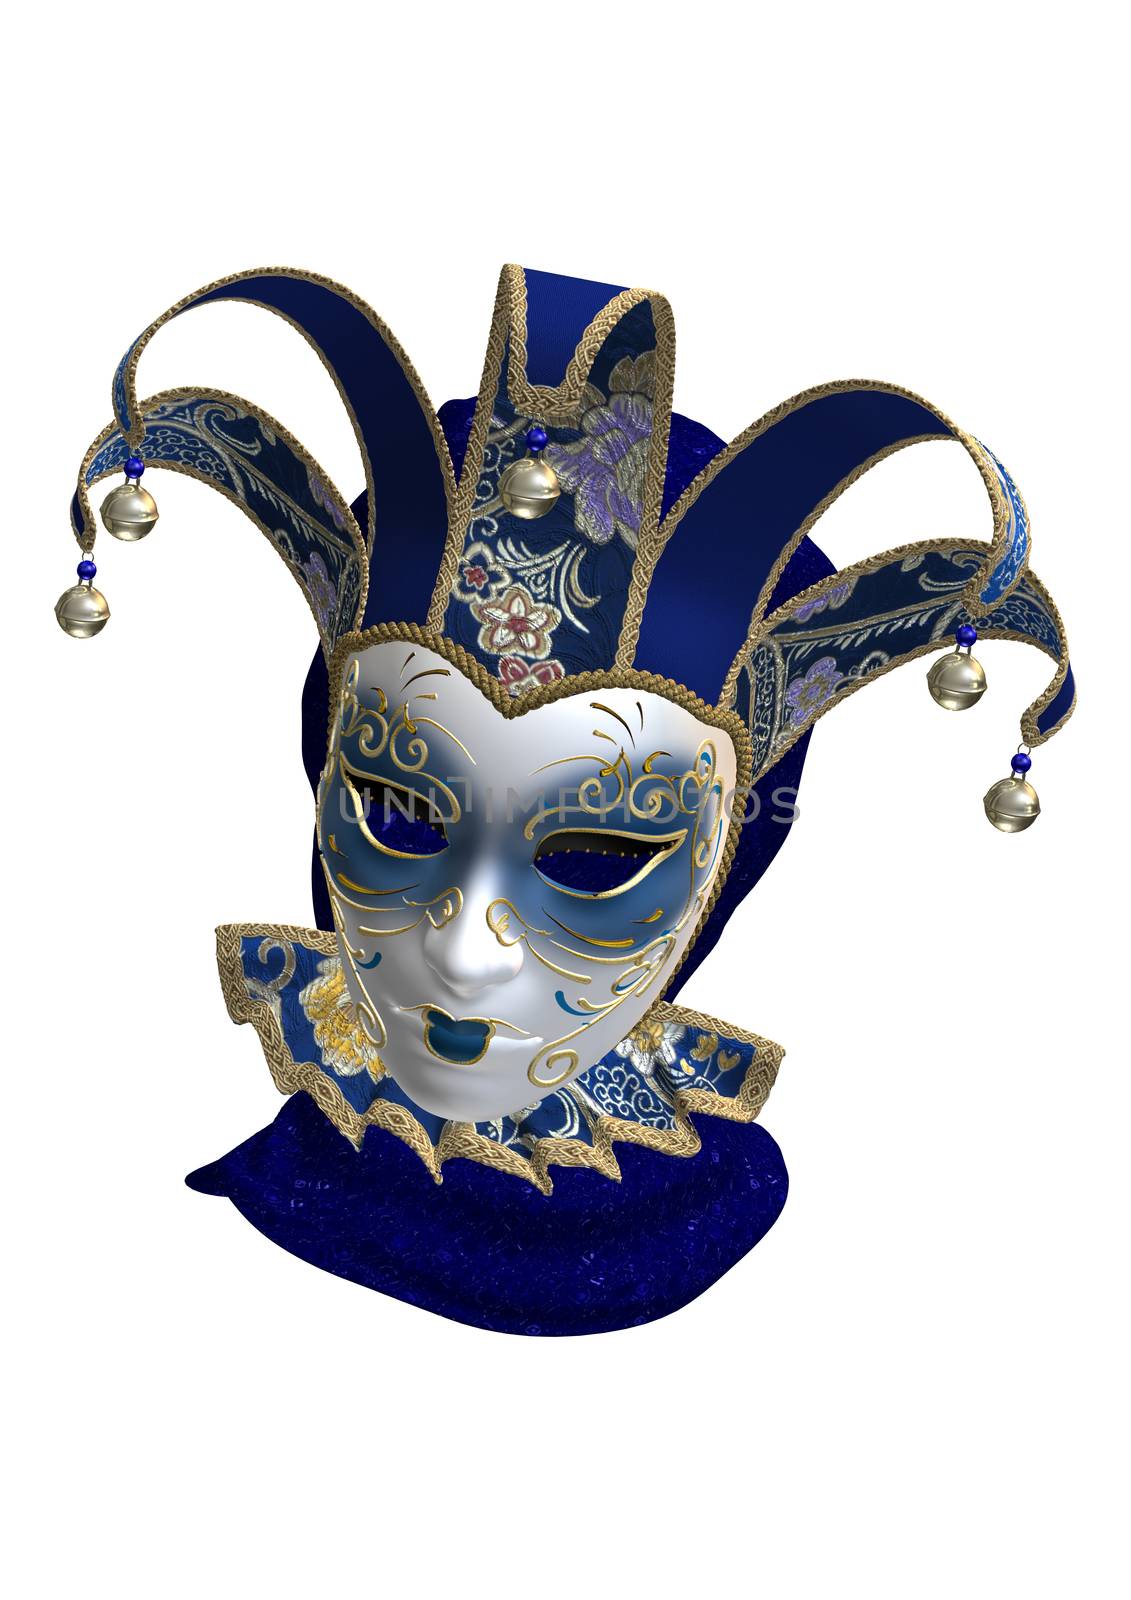 3D digital render of a blue Venetian mask isolated on white background